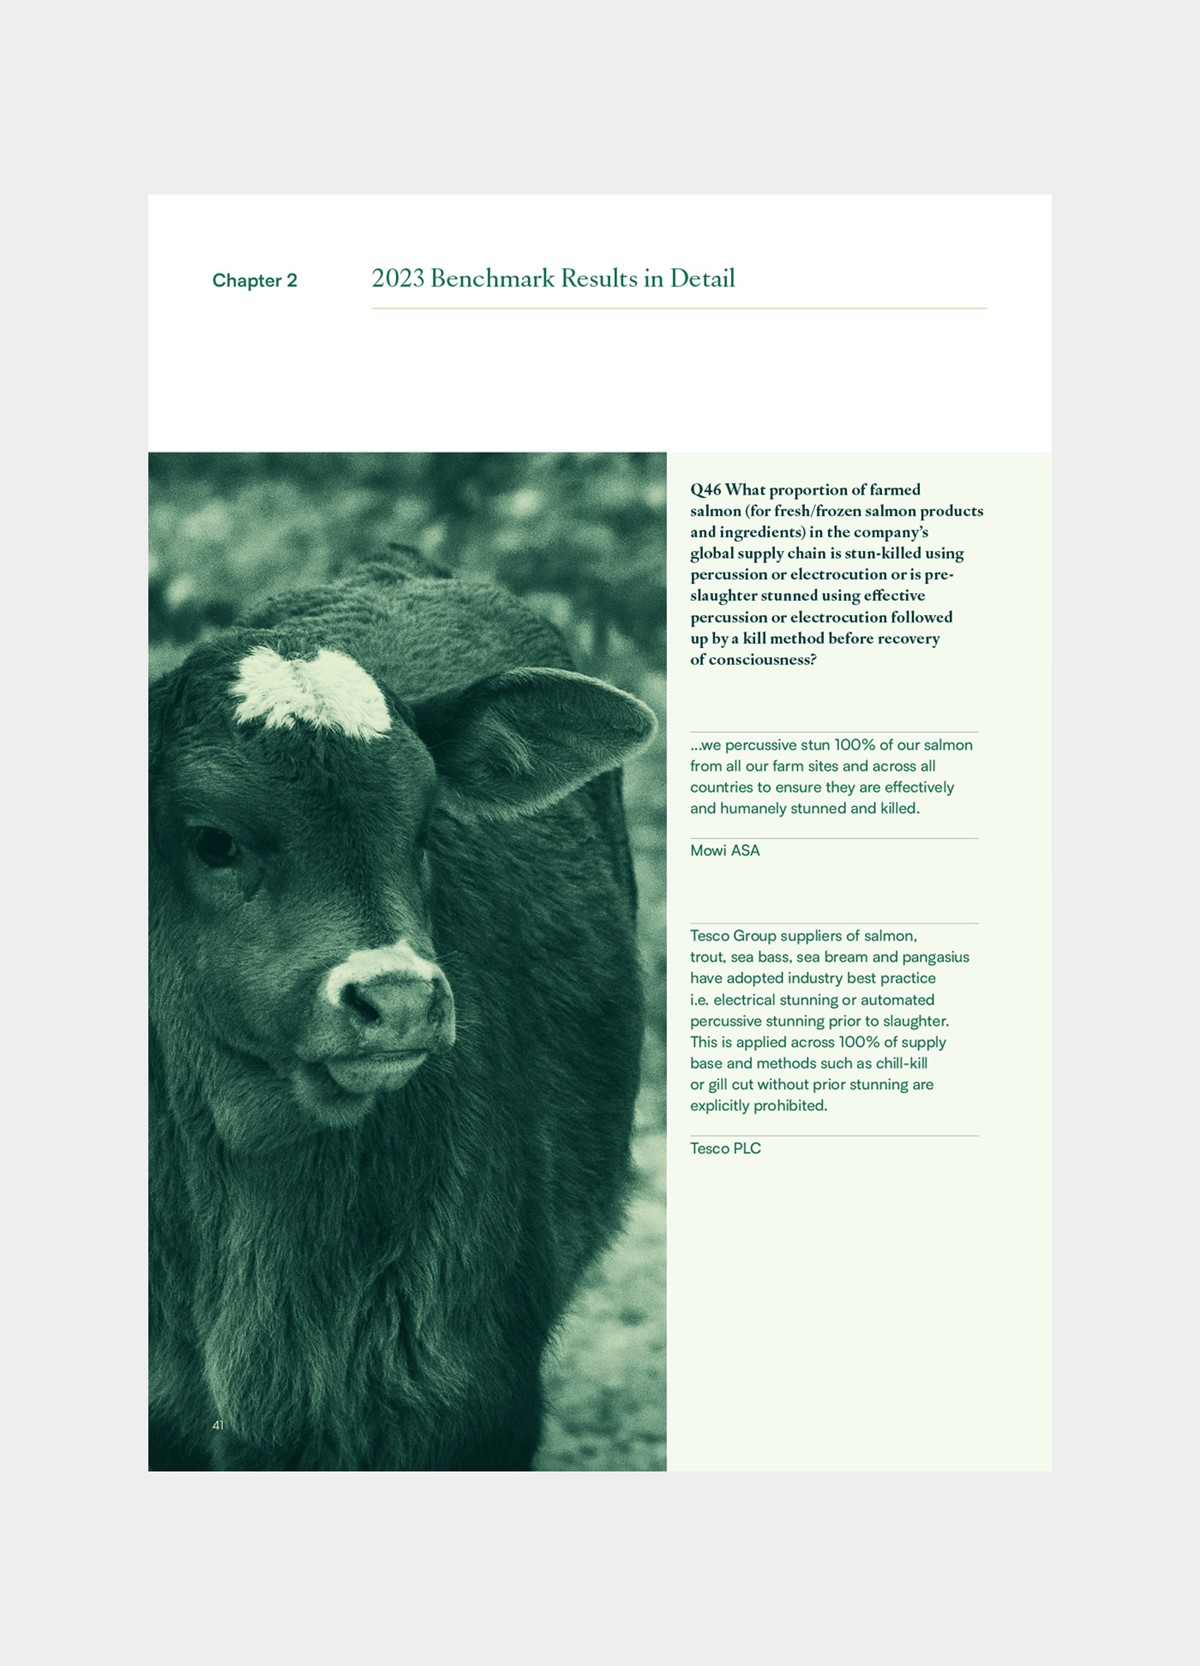 BBFAW. Annual report layout by design agency Superfried, Manchester.